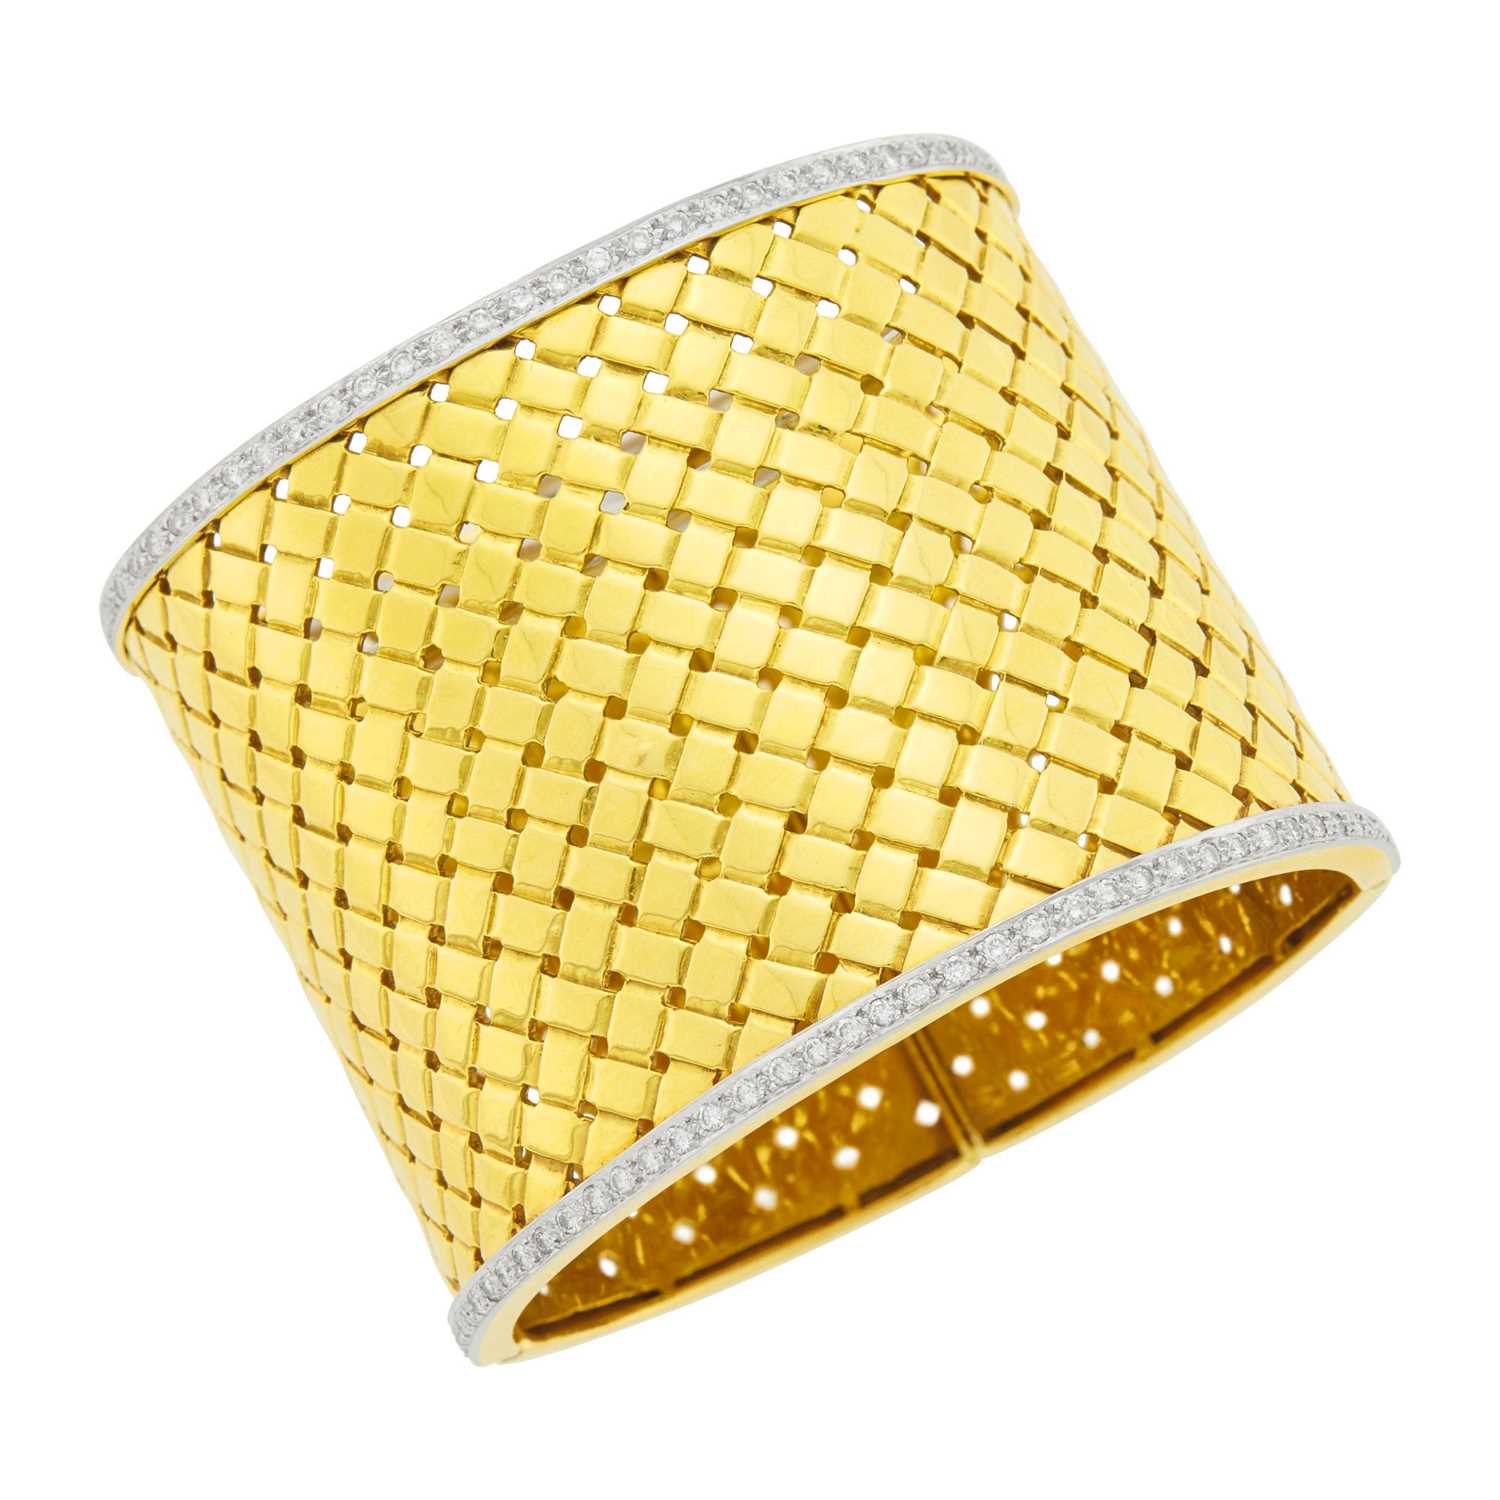 Lot 131 - Two-Color Gold and Diamond Basketweave Cuff Bangle Bracelet